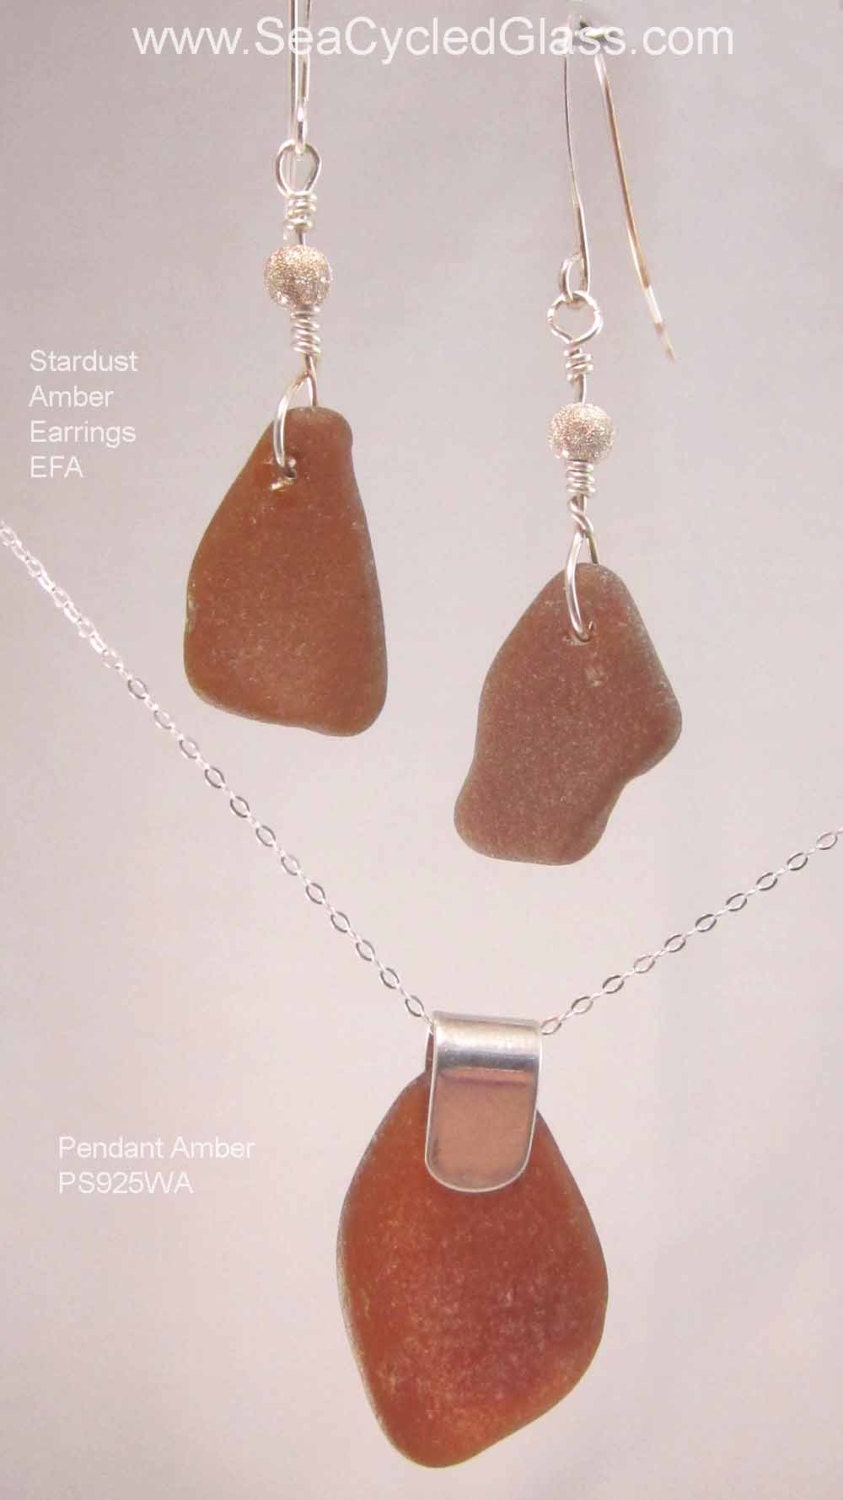 Stardust Earrings - Amber sea glass from Cape Breton, Nova Scotia, Canda with Sterling silver bead on a nickel-free hook